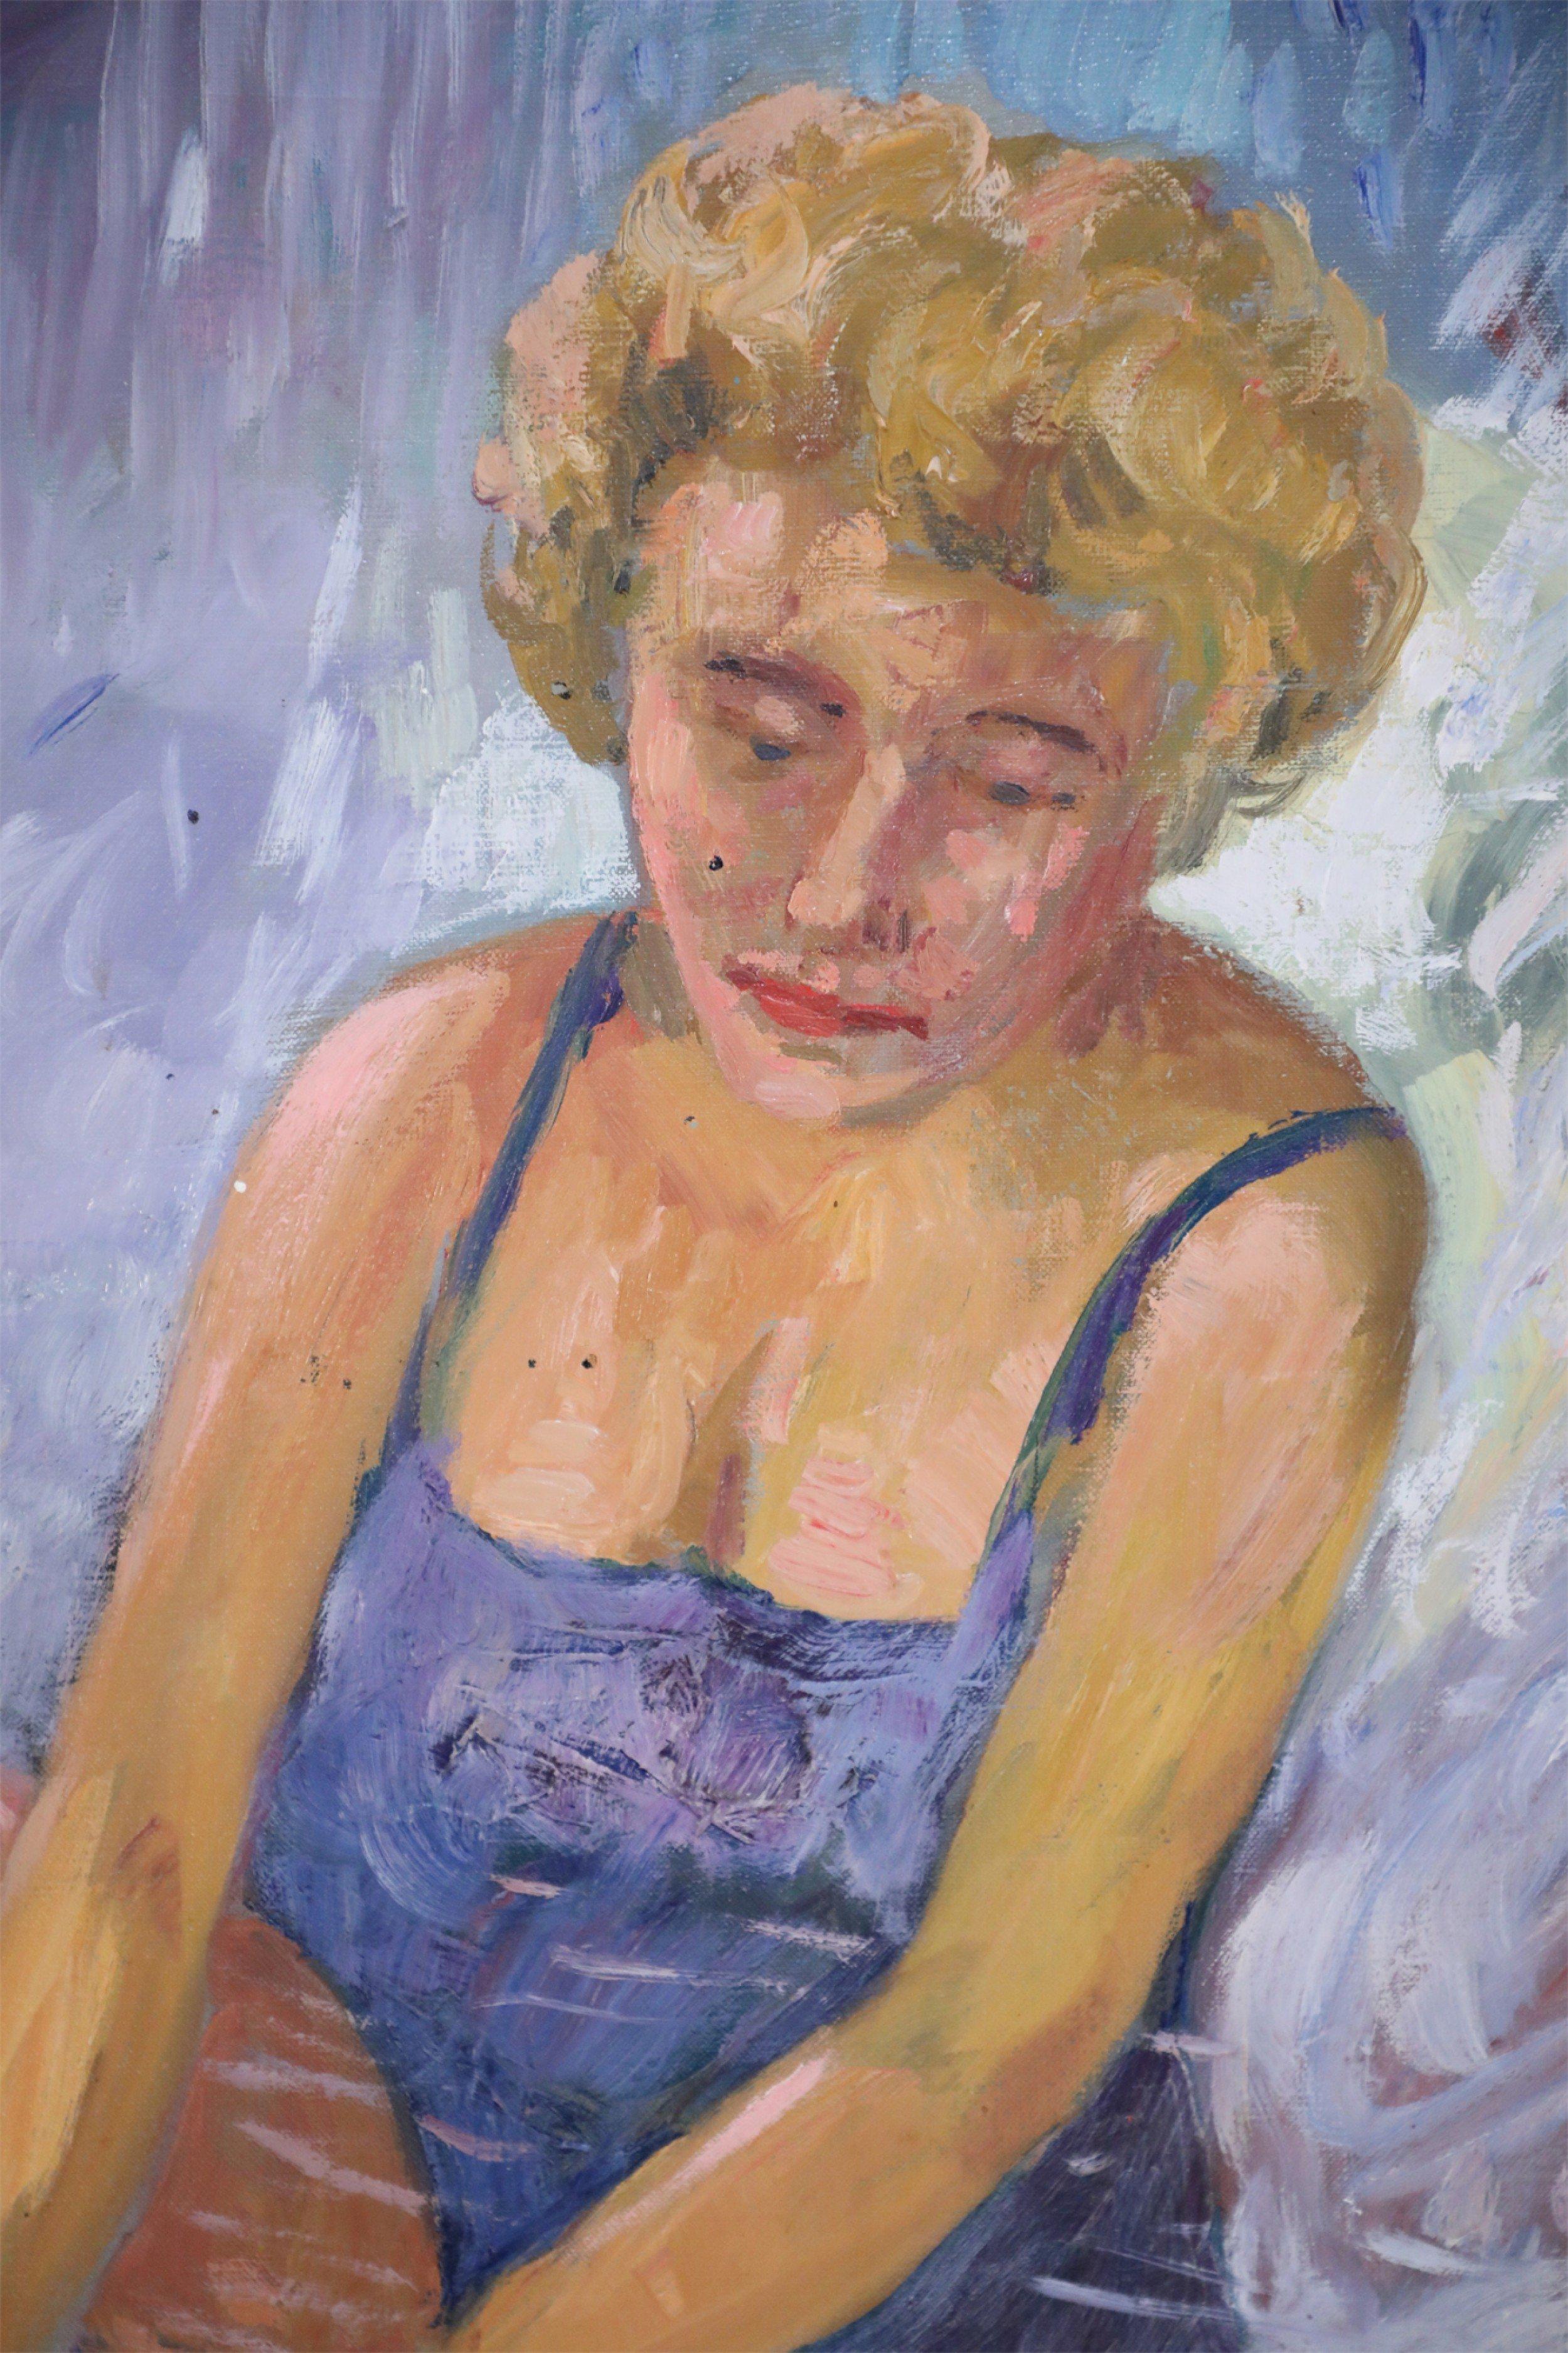 Vintage (20th century) portrait of a woman wearing a blue bathing suit, seated amidst white abstract patterns representing falling and splashing water, painted on rectangular unframed canvas.
      